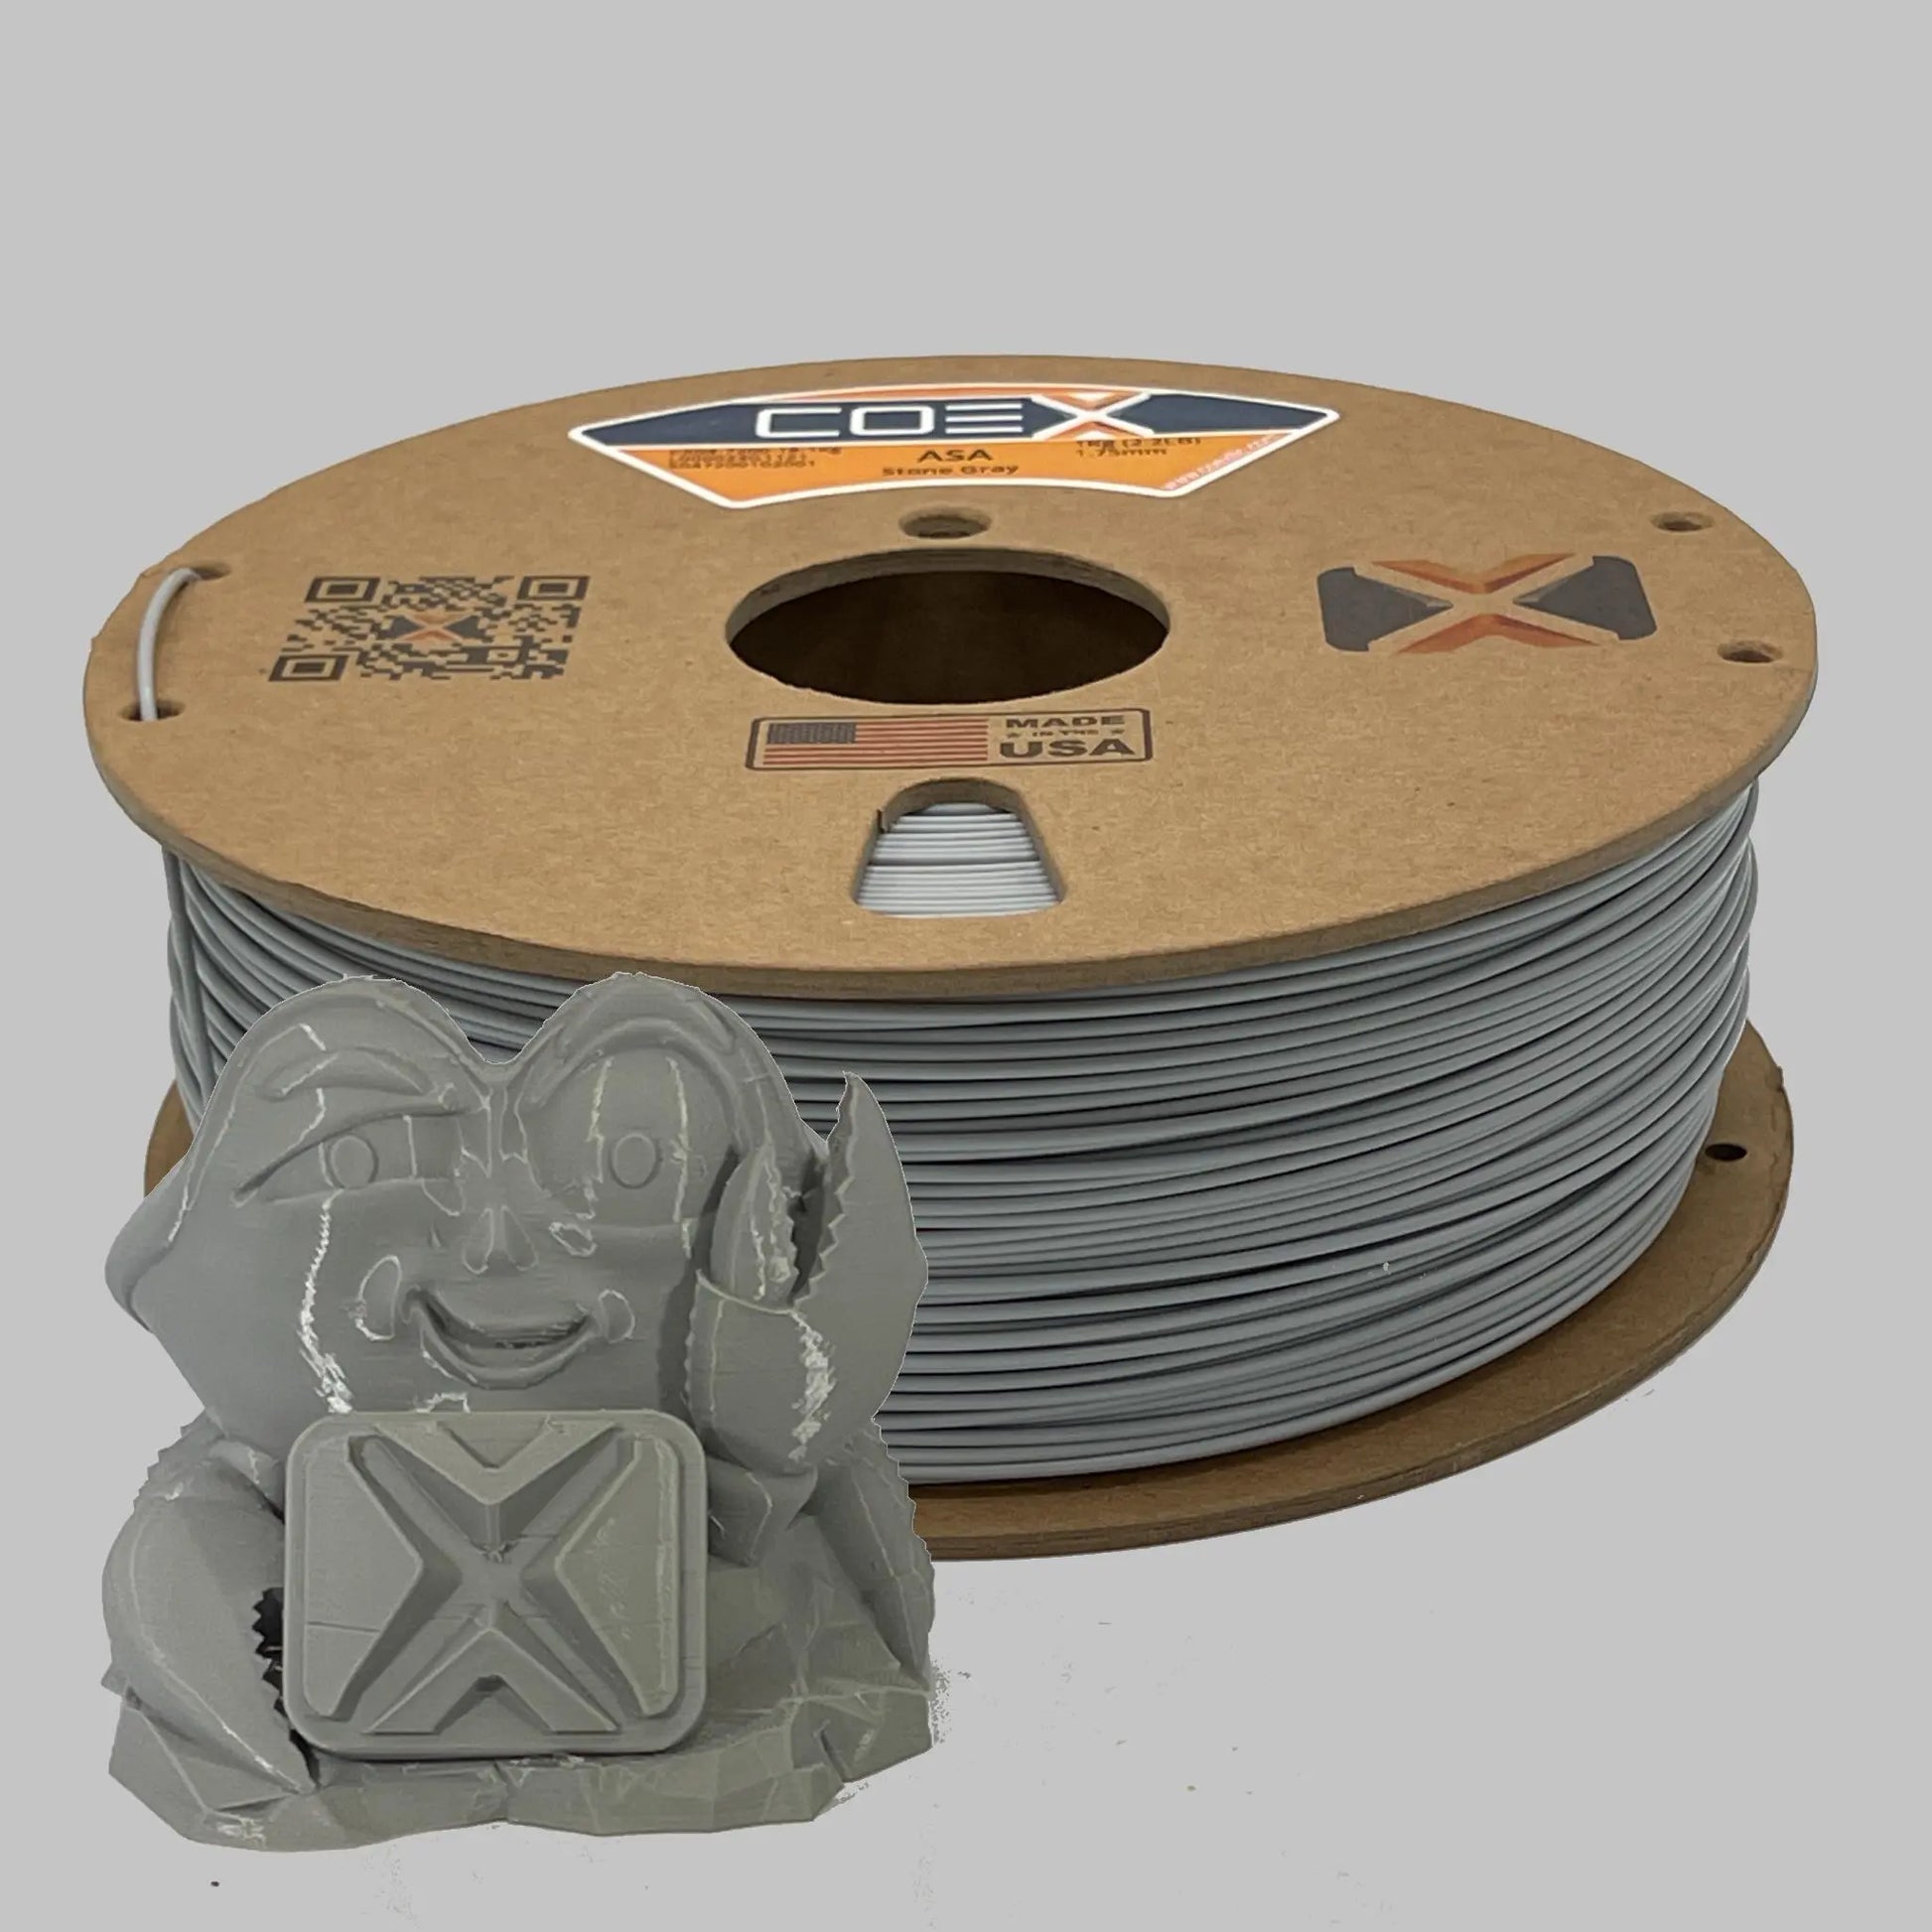 Durable ASA Filament for Outdoor and Industrial 3D Printing